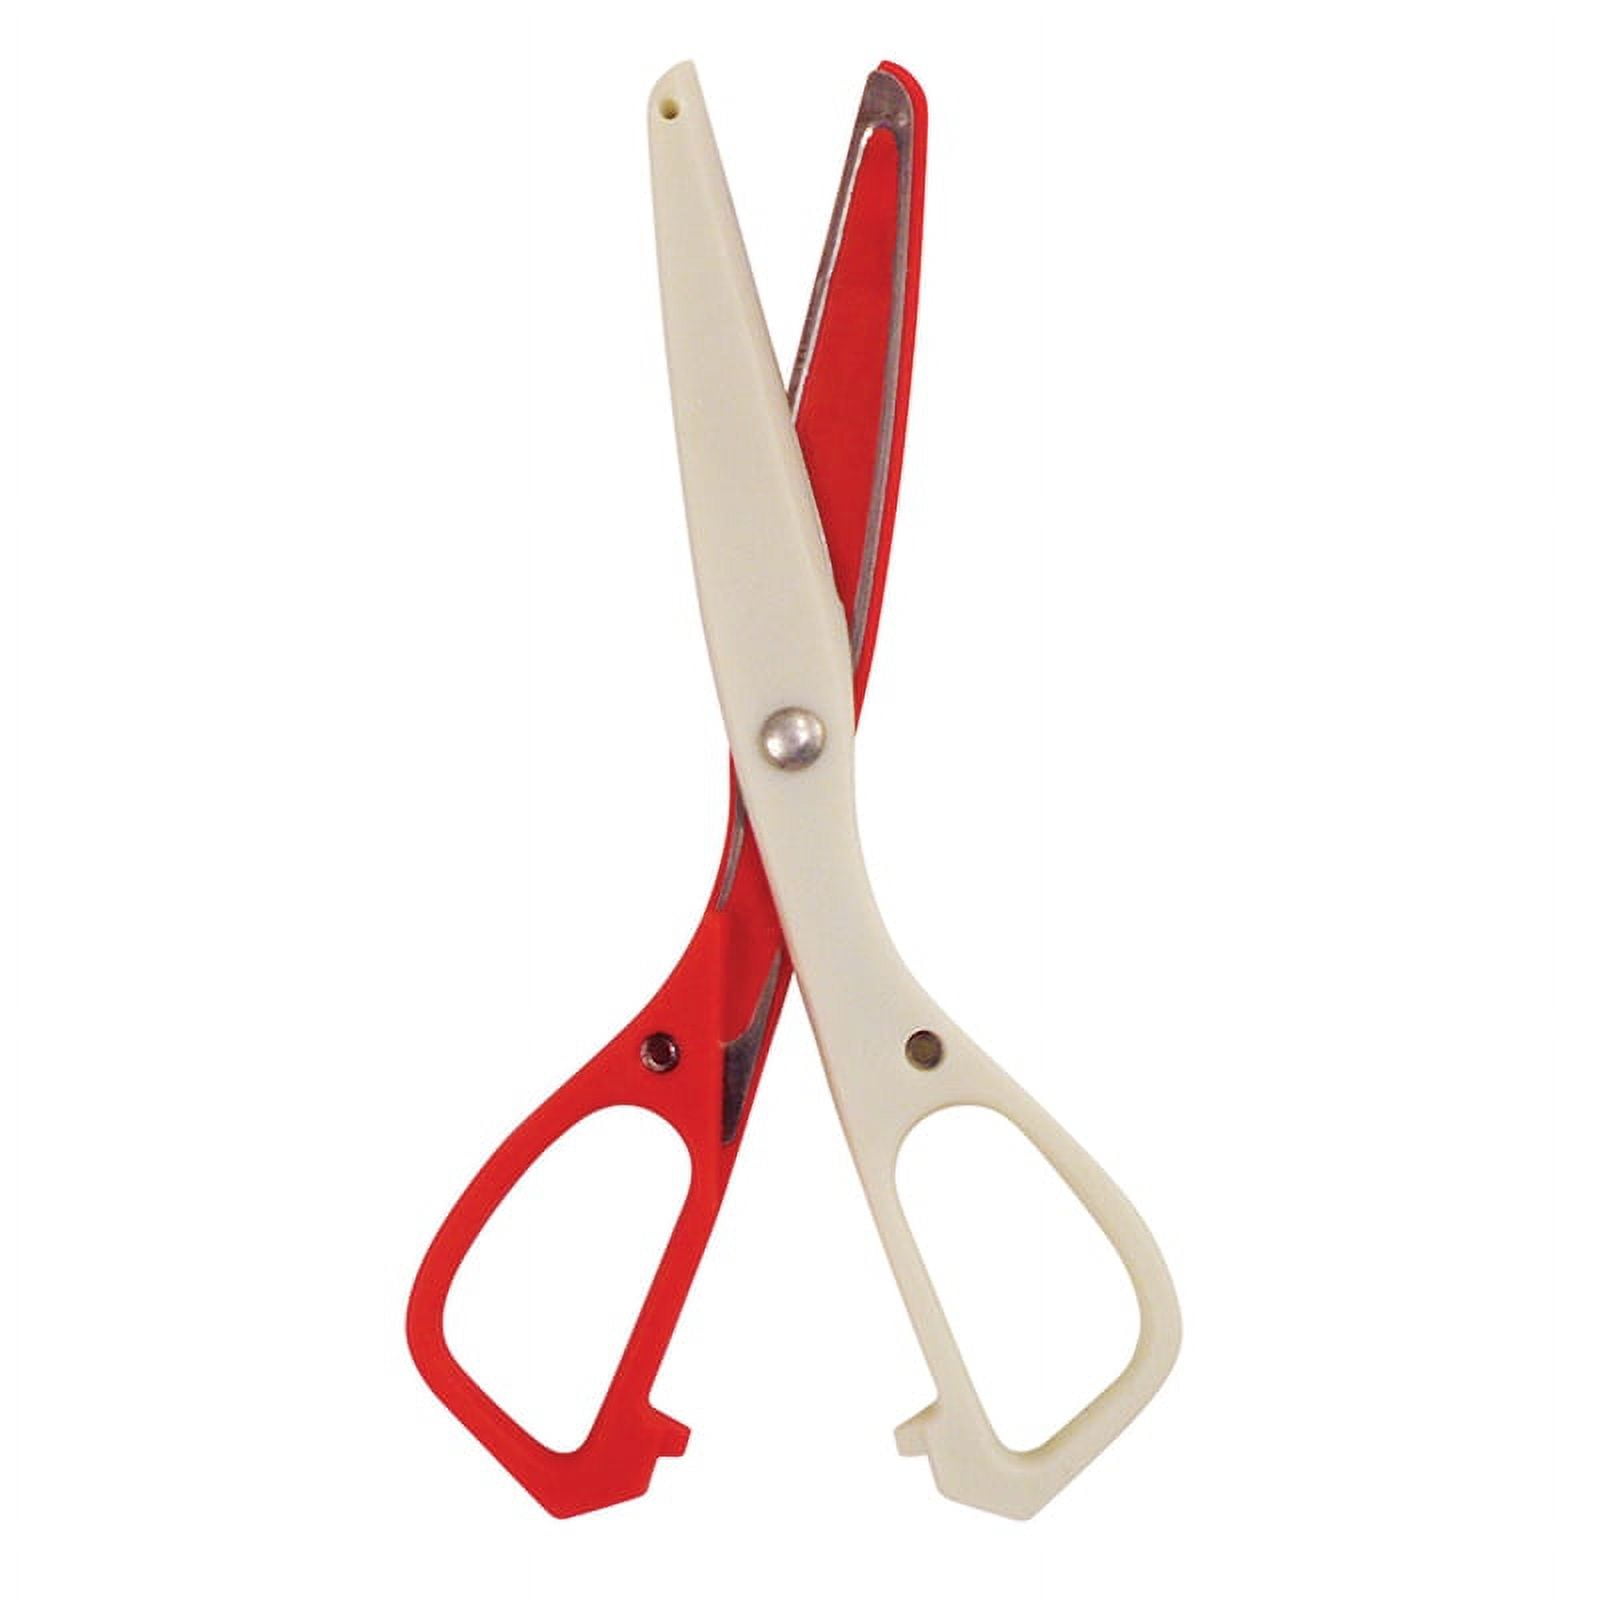 370+ Safety Scissors Stock Photos, Pictures & Royalty-Free Images